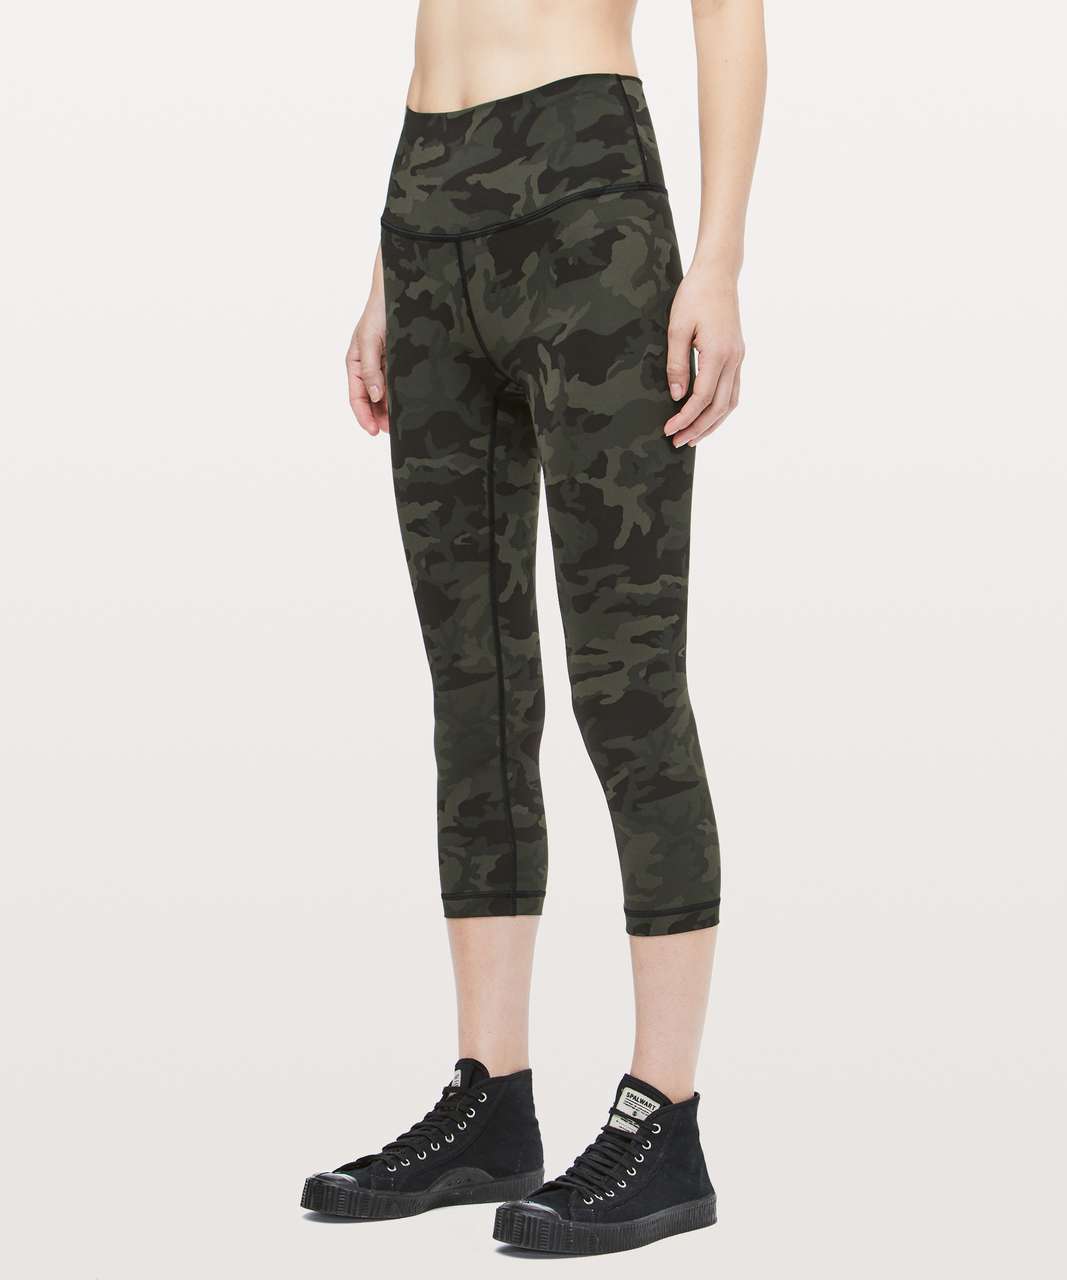 Lululemon Wunder Under Crop (High-Rise) *Full-On Luxtreme 21" - Incognito Camo Multi Gator Green